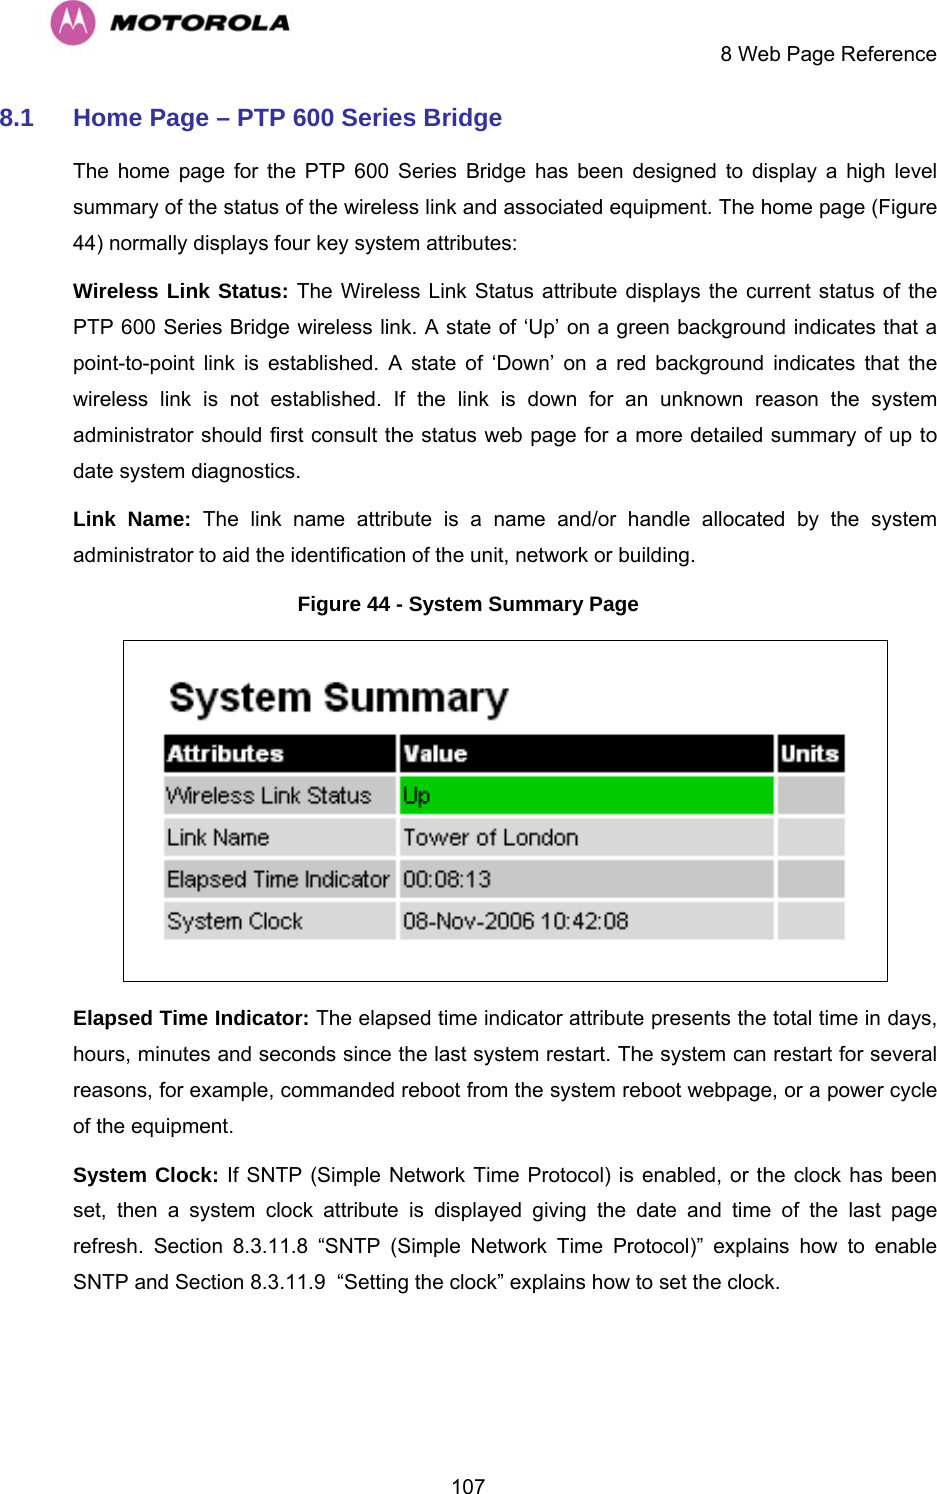     8 Web Page Reference  1078.1  Home Page – PTP 600 Series Bridge  The home page for the PTP 600 Series Bridge has been designed to display a high level summary of the status of the wireless link and associated equipment. The home page (Figure 44) normally displays four key system attributes: Wireless Link Status: The Wireless Link Status attribute displays the current status of the PTP 600 Series Bridge wireless link. A state of ‘Up’ on a green background indicates that a point-to-point link is established. A state of ‘Down’ on a red background indicates that the wireless link is not established. If the link is down for an unknown reason the system administrator should first consult the status web page for a more detailed summary of up to date system diagnostics.  Link Name: The link name attribute is a name and/or handle allocated by the system administrator to aid the identification of the unit, network or building.  Figure 44 - System Summary Page  Elapsed Time Indicator: The elapsed time indicator attribute presents the total time in days, hours, minutes and seconds since the last system restart. The system can restart for several reasons, for example, commanded reboot from the system reboot webpage, or a power cycle of the equipment.  System Clock: If SNTP (Simple Network Time Protocol) is enabled, or the clock has been set, then a system clock attribute is displayed giving the date and time of the last page refresh. Section 8.3.11.8 “SNTP (Simple Network Time Protocol)” explains how to enable SNTP and Section 8.3.11.9  “Setting the clock” explains how to set the clock. 